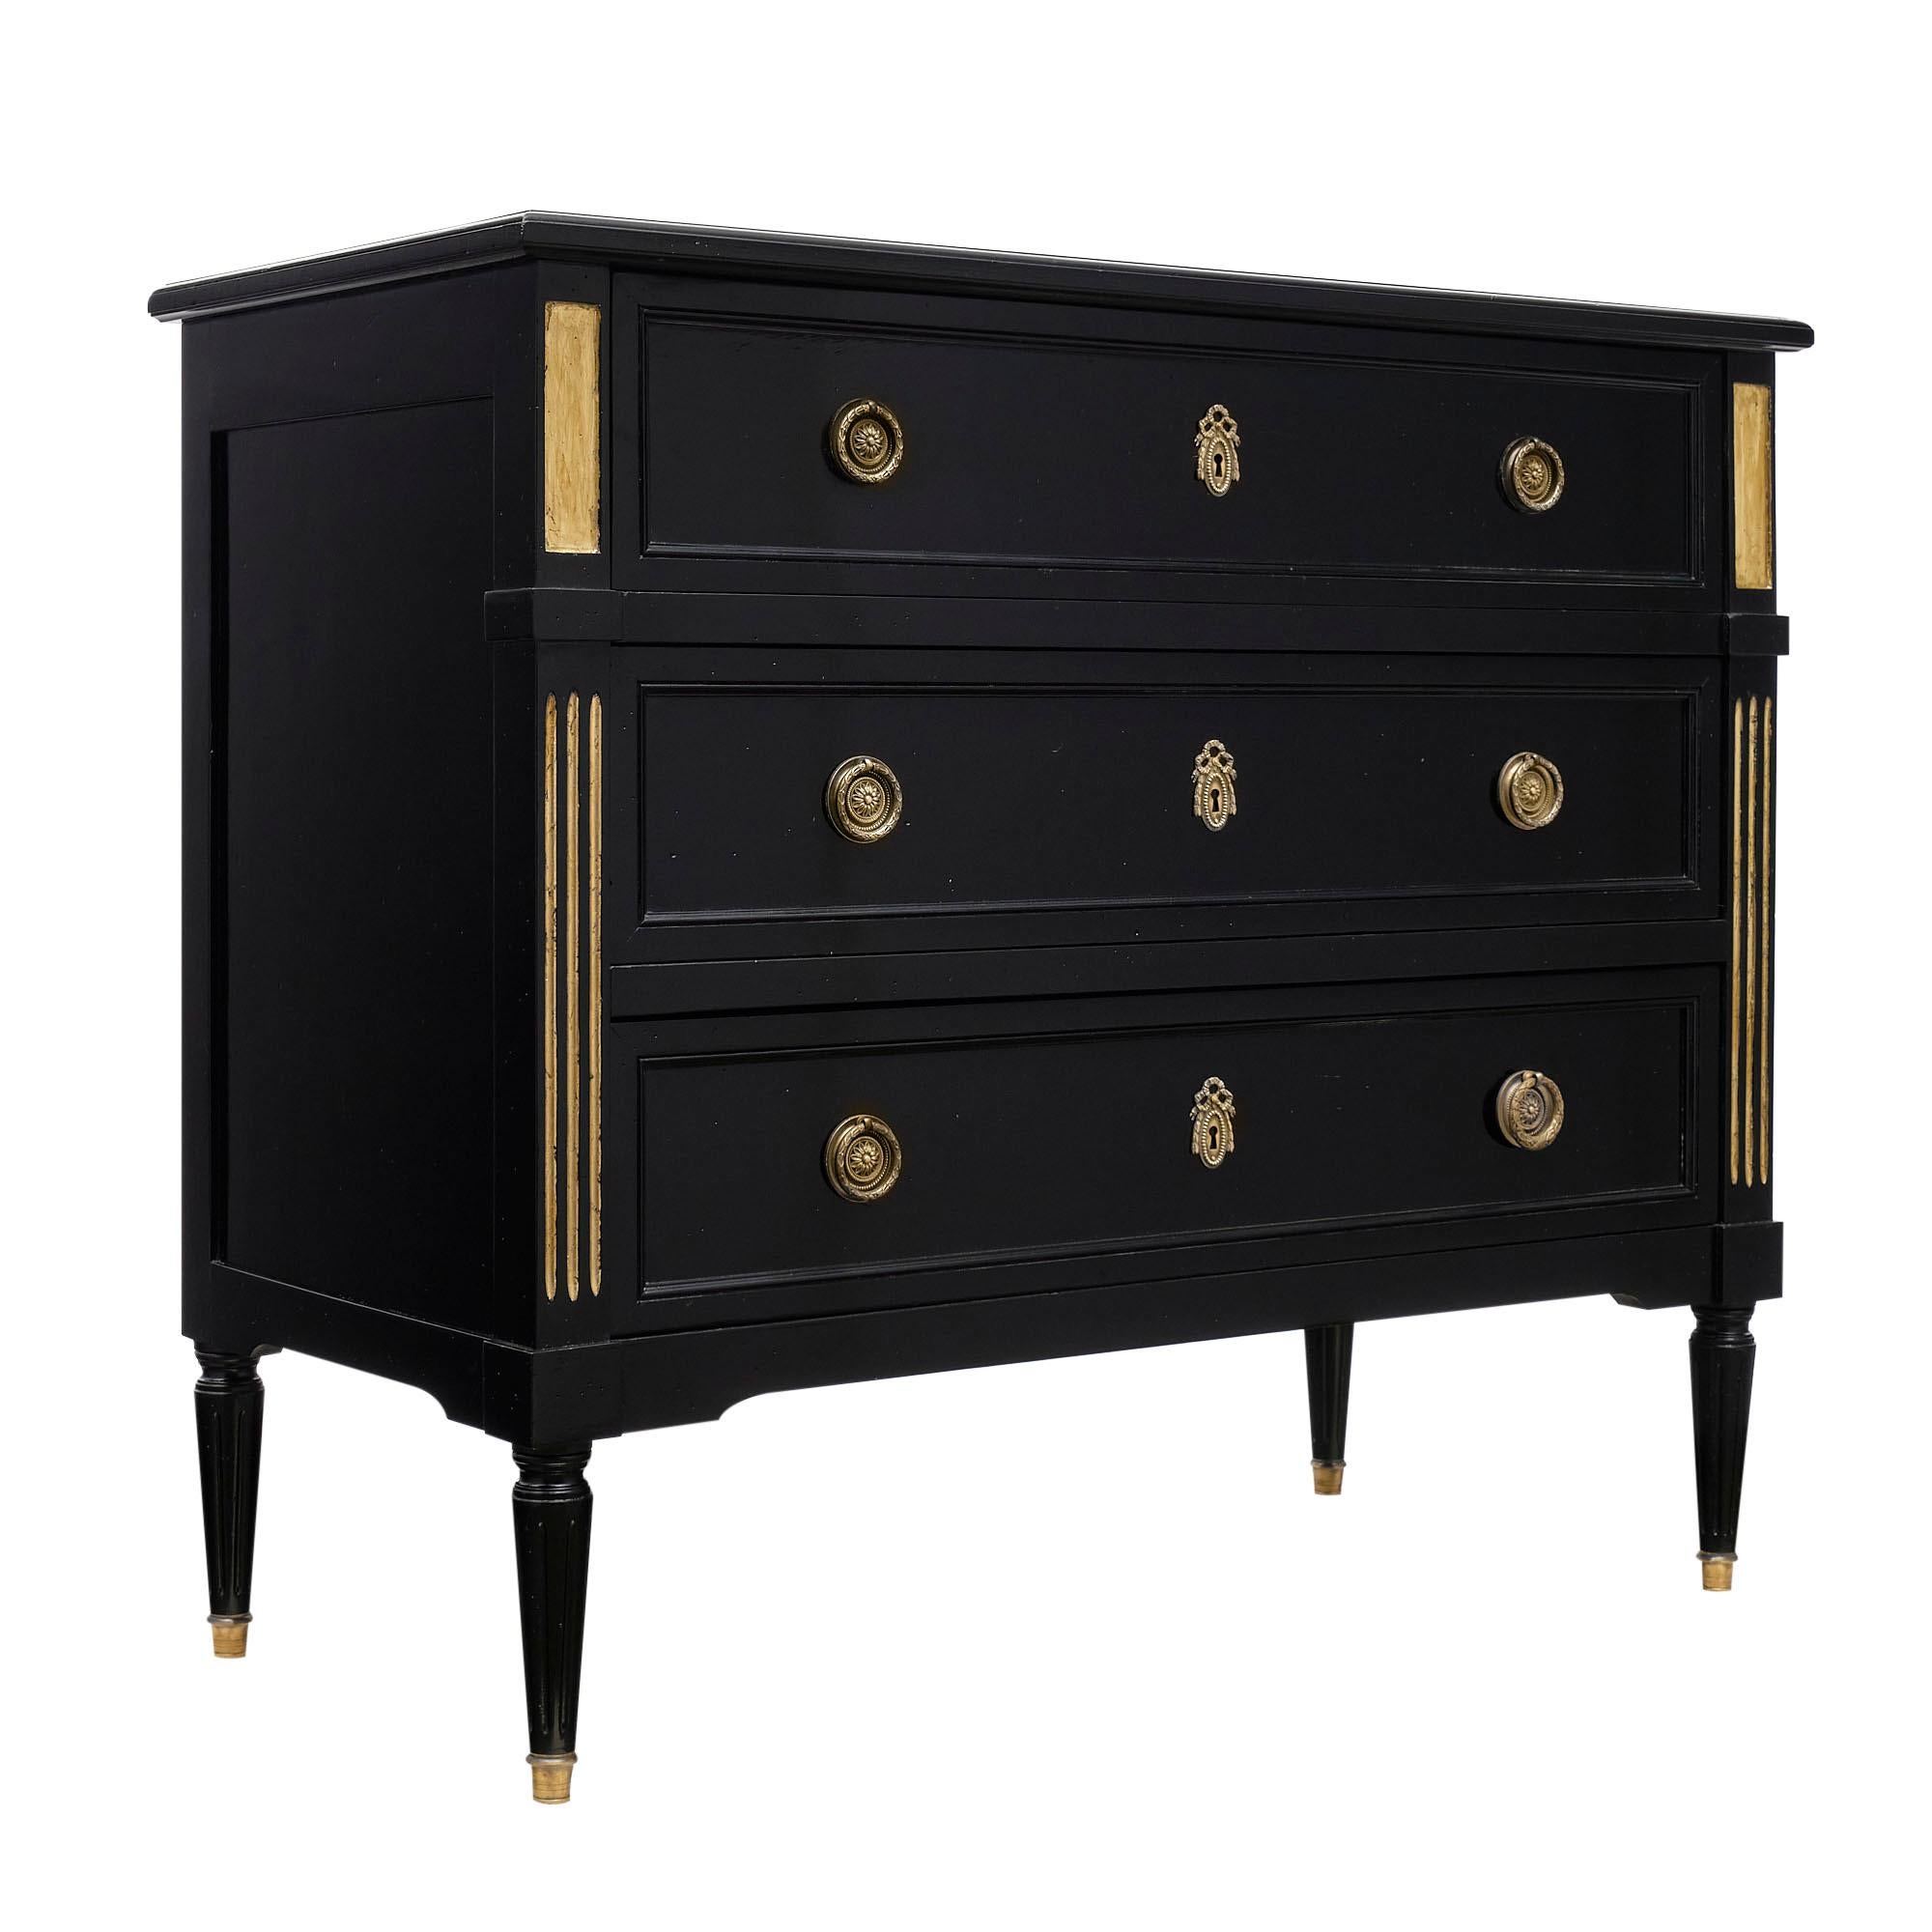 Louis XVI chest / secrétiare from France made of solid cherrywood that has been ebonized and finished in a lustrous French polish. The gilt brass hardware and gold leafed fluting adds beautiful detail. Above the two bottom dovetailed drawers is a